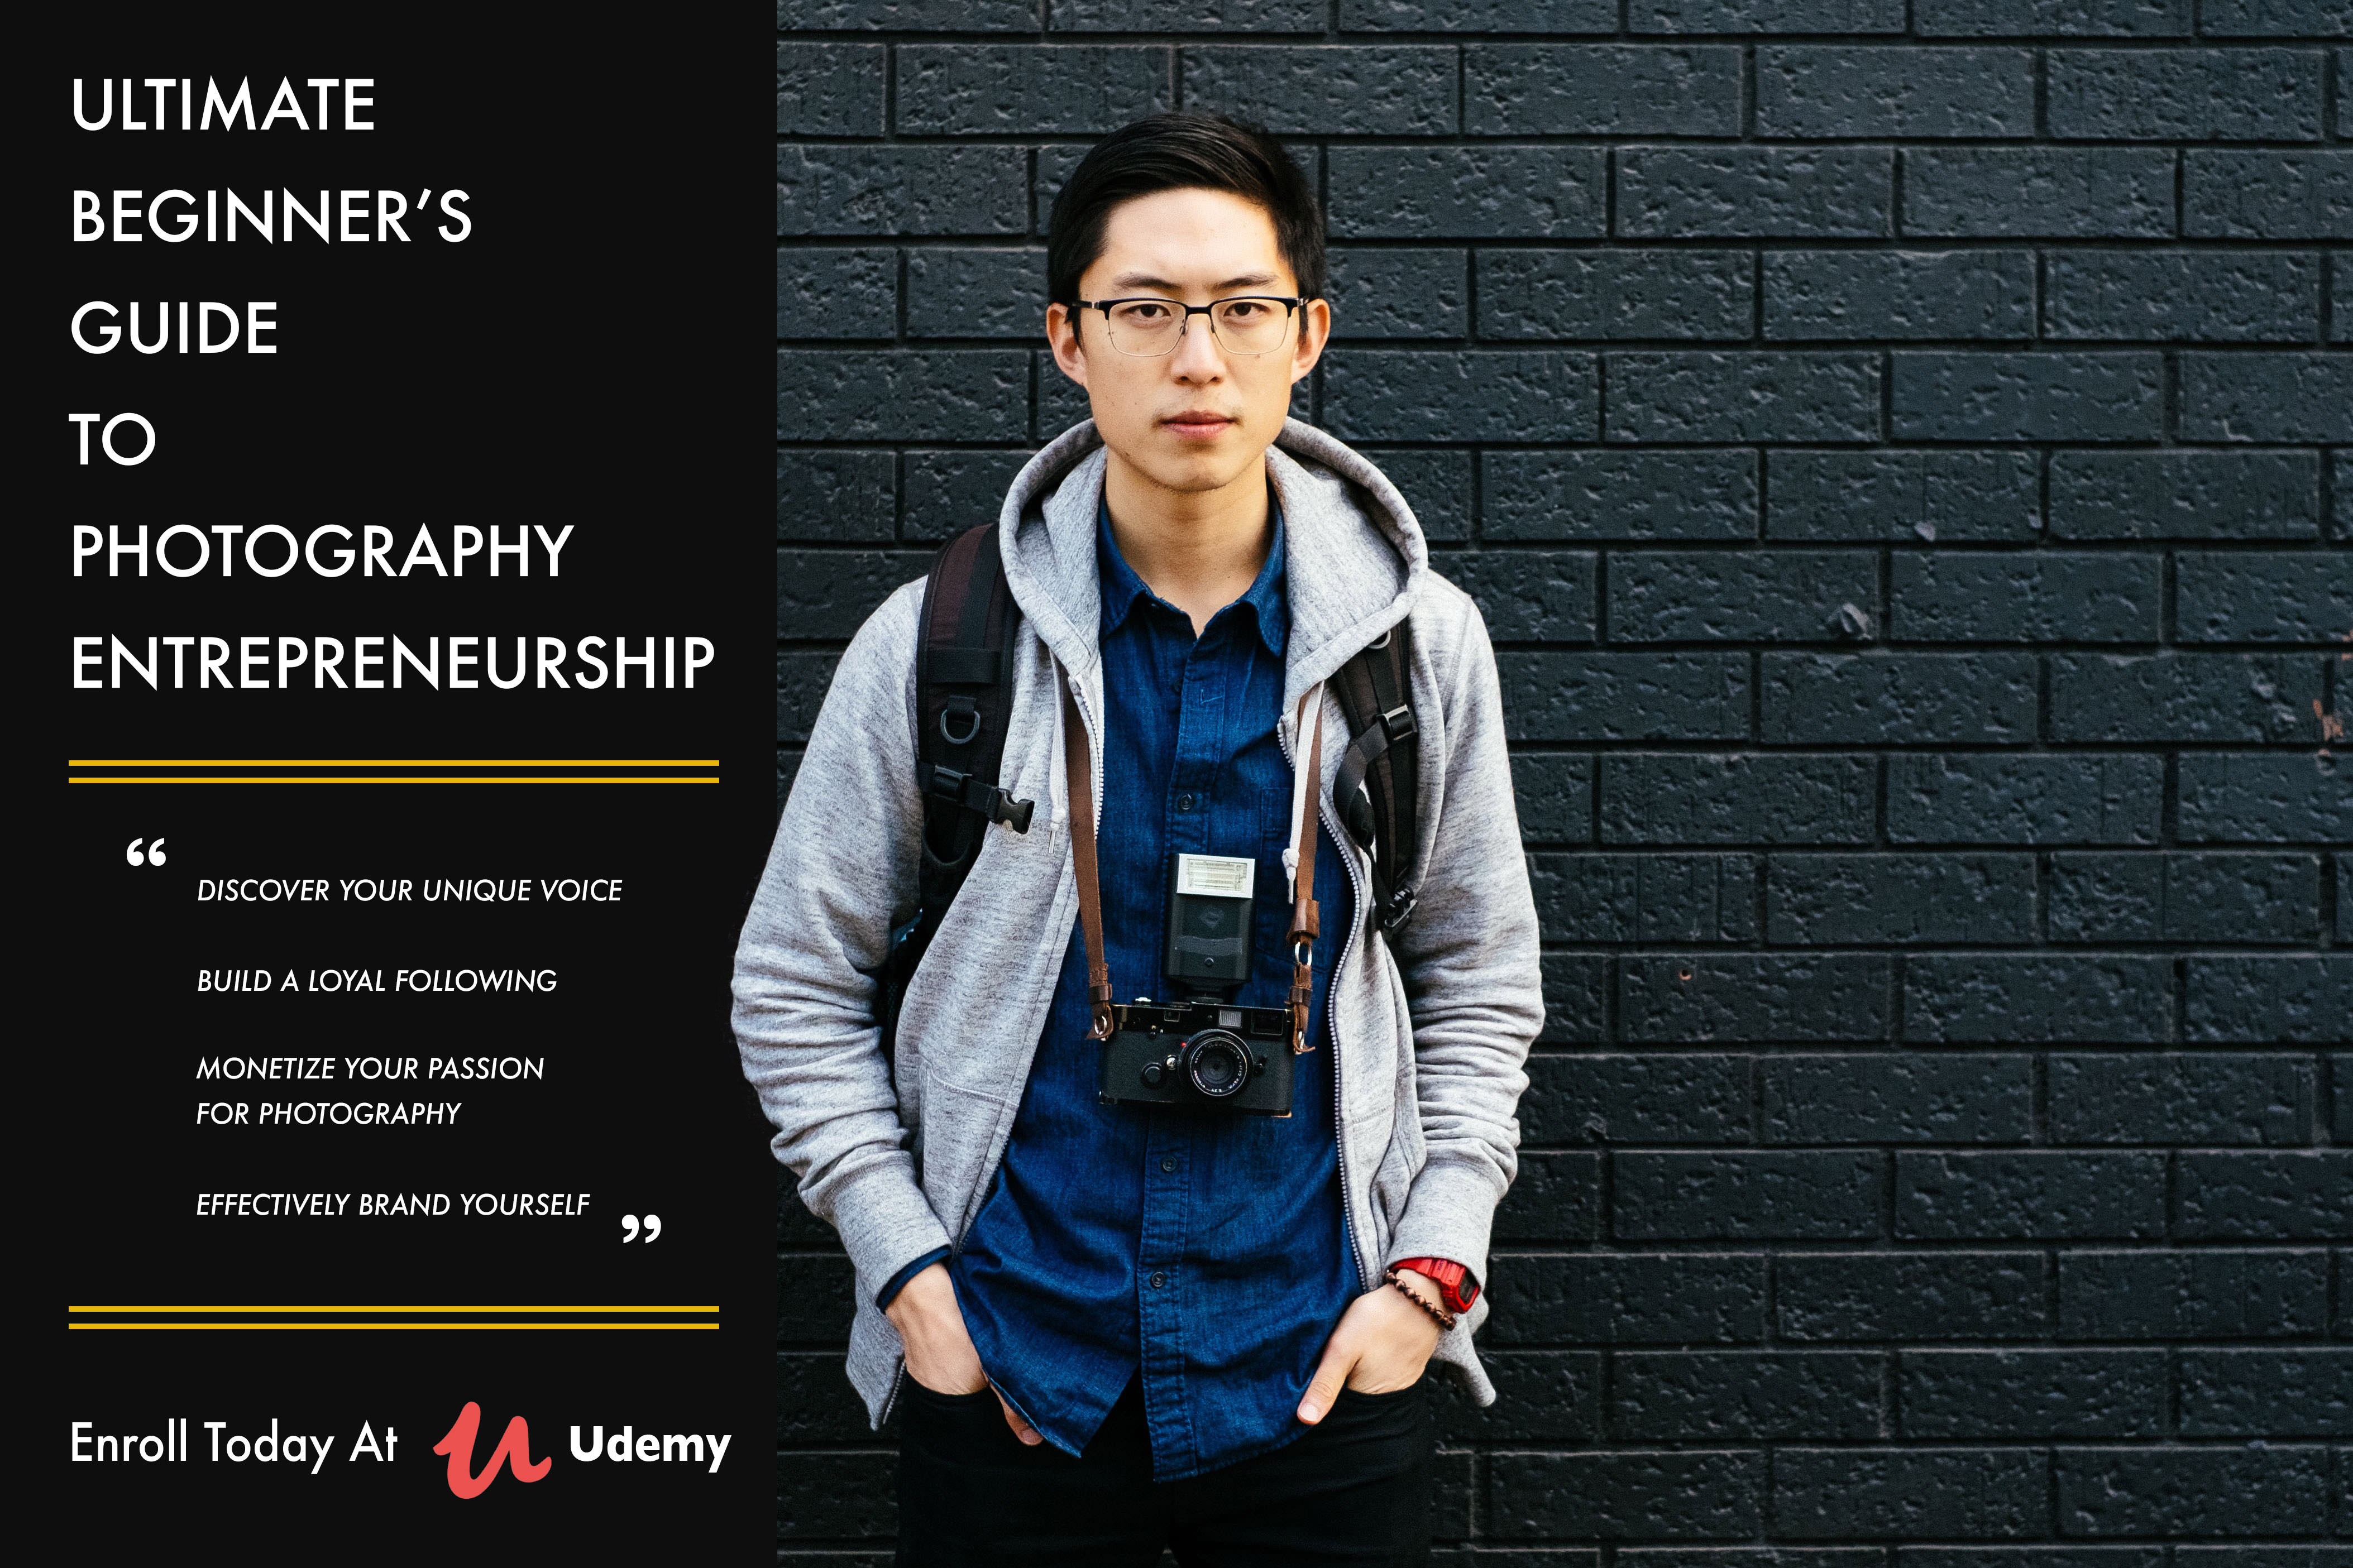 Check out my new course, "Ultimate Beginner's Guide to Photography Entrepreneurship" now on Udemy!